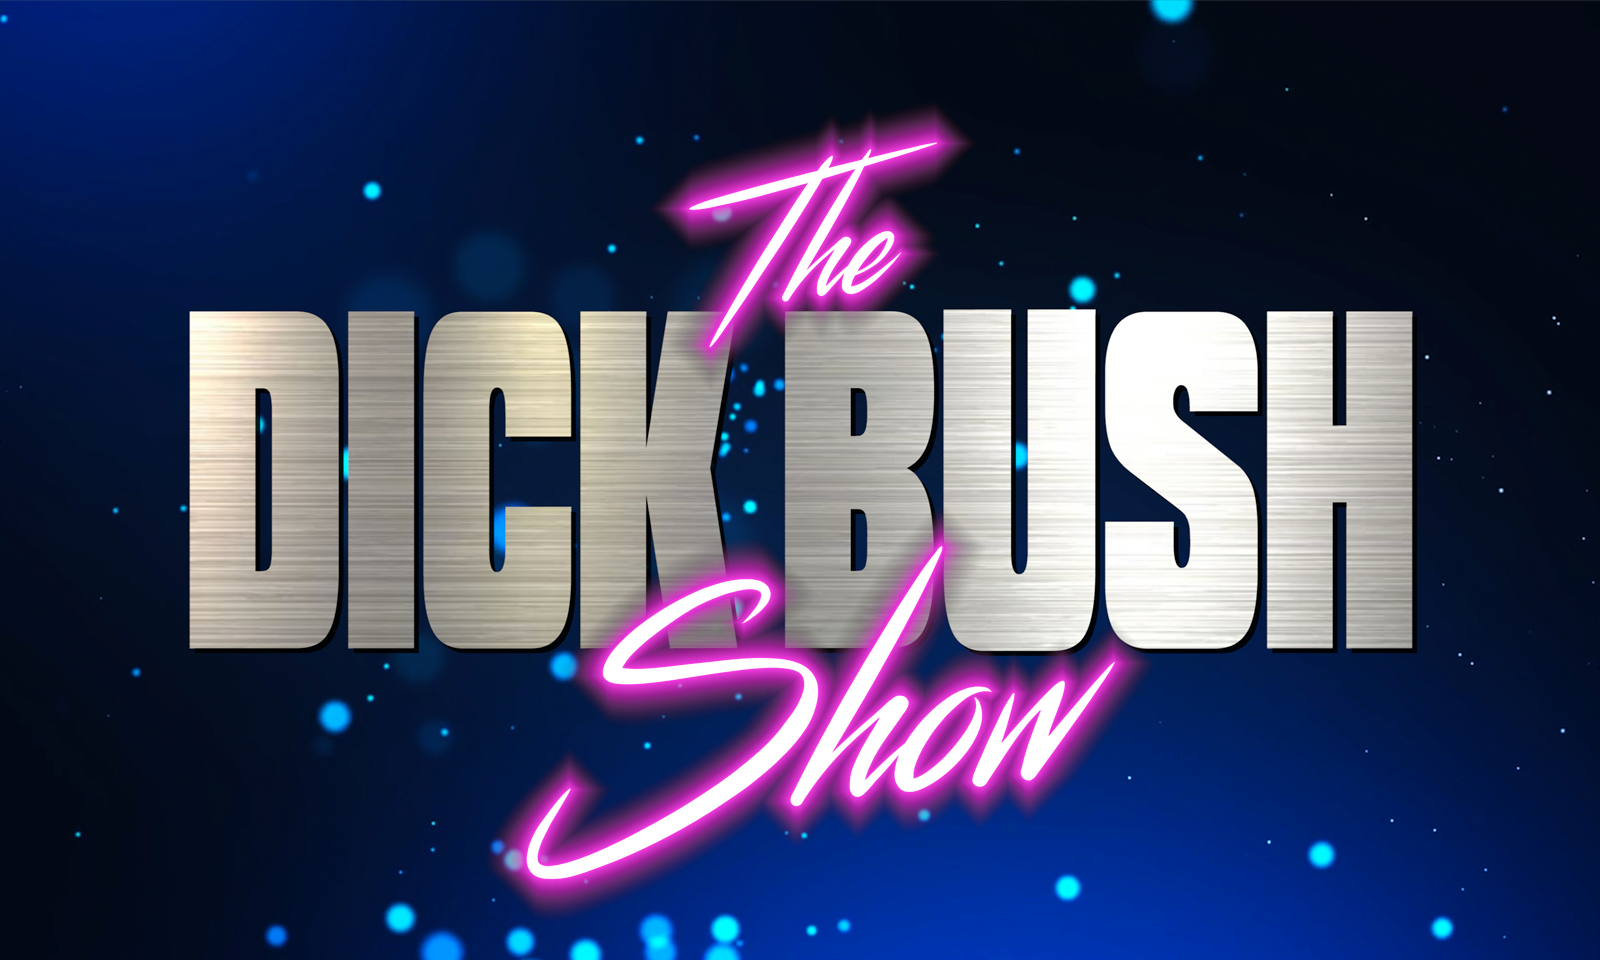 Pornstar Comedy Chat Show ’Dick Bush Show’ Bows on YouTube